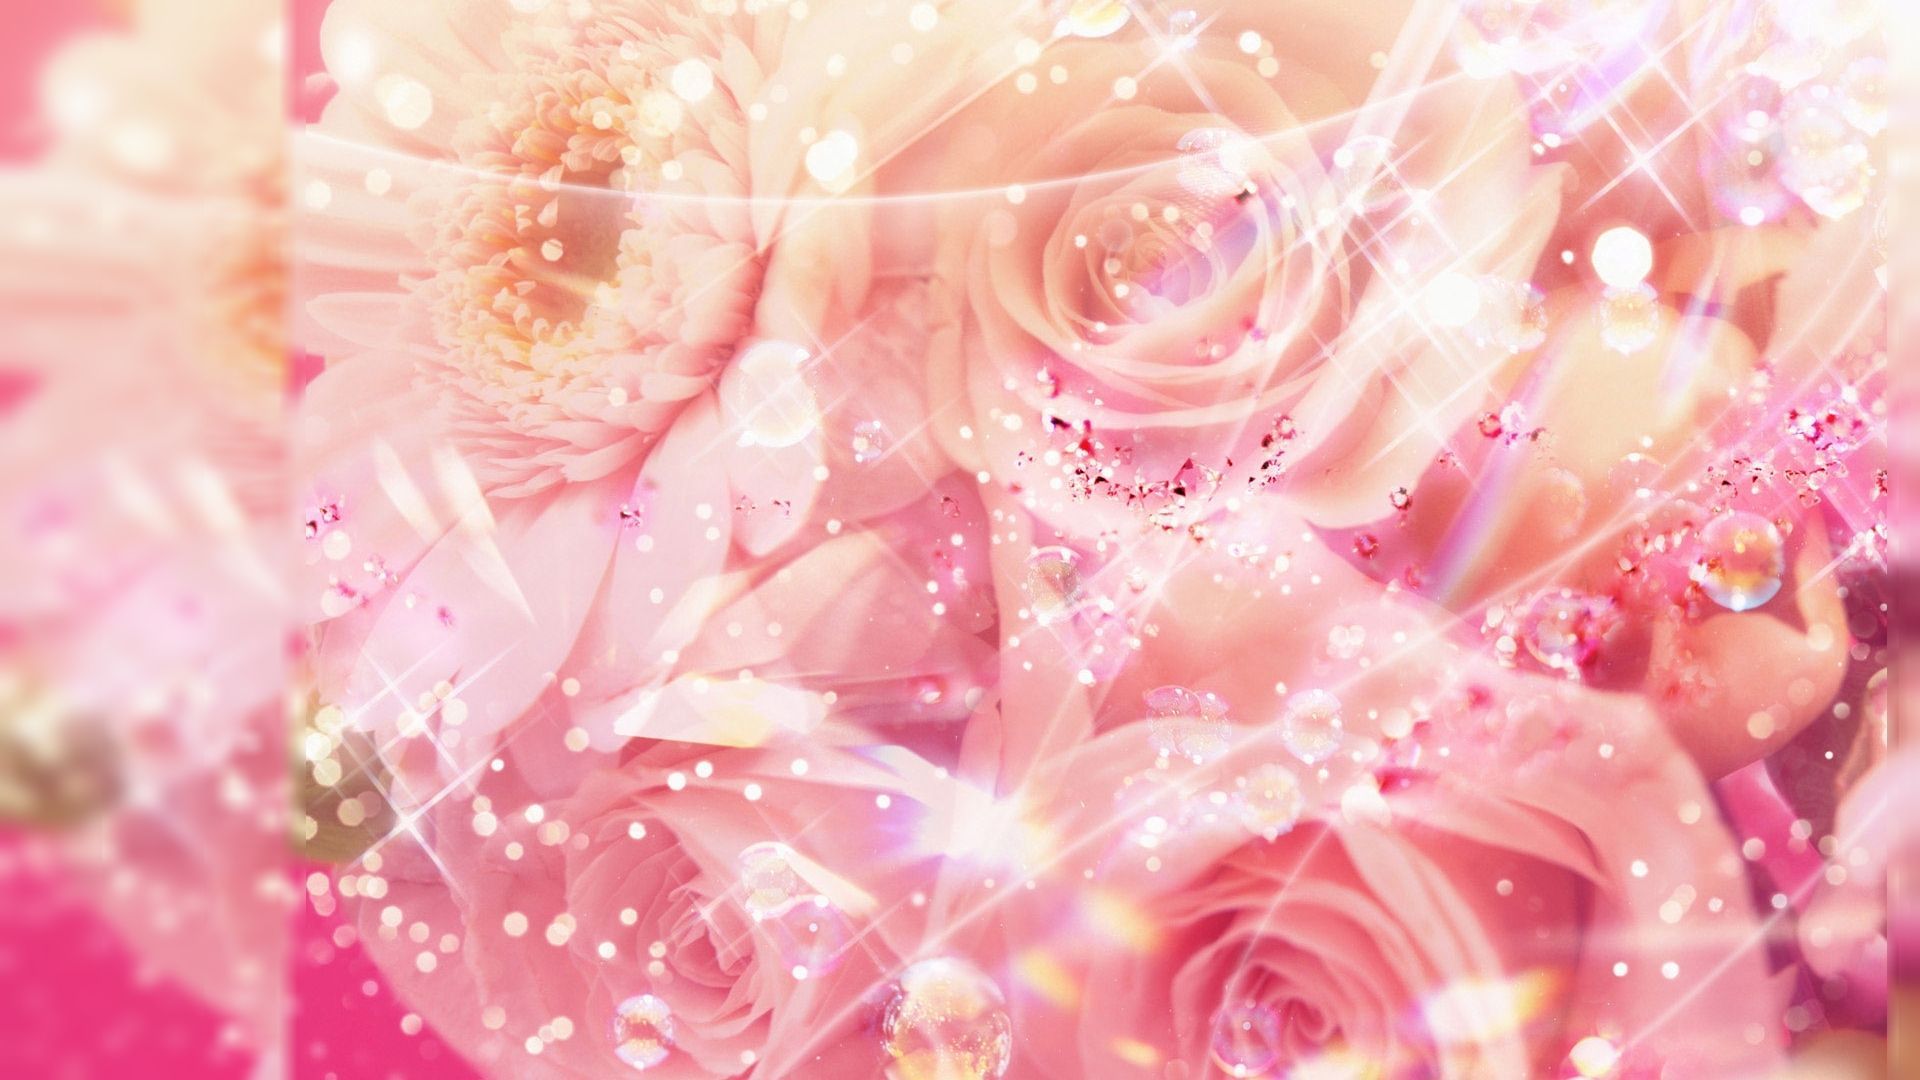 Pink full hd, hdtv, fhd, 1080p wallpapers hd, desktop backgrounds 1920x1080,  images and pictures